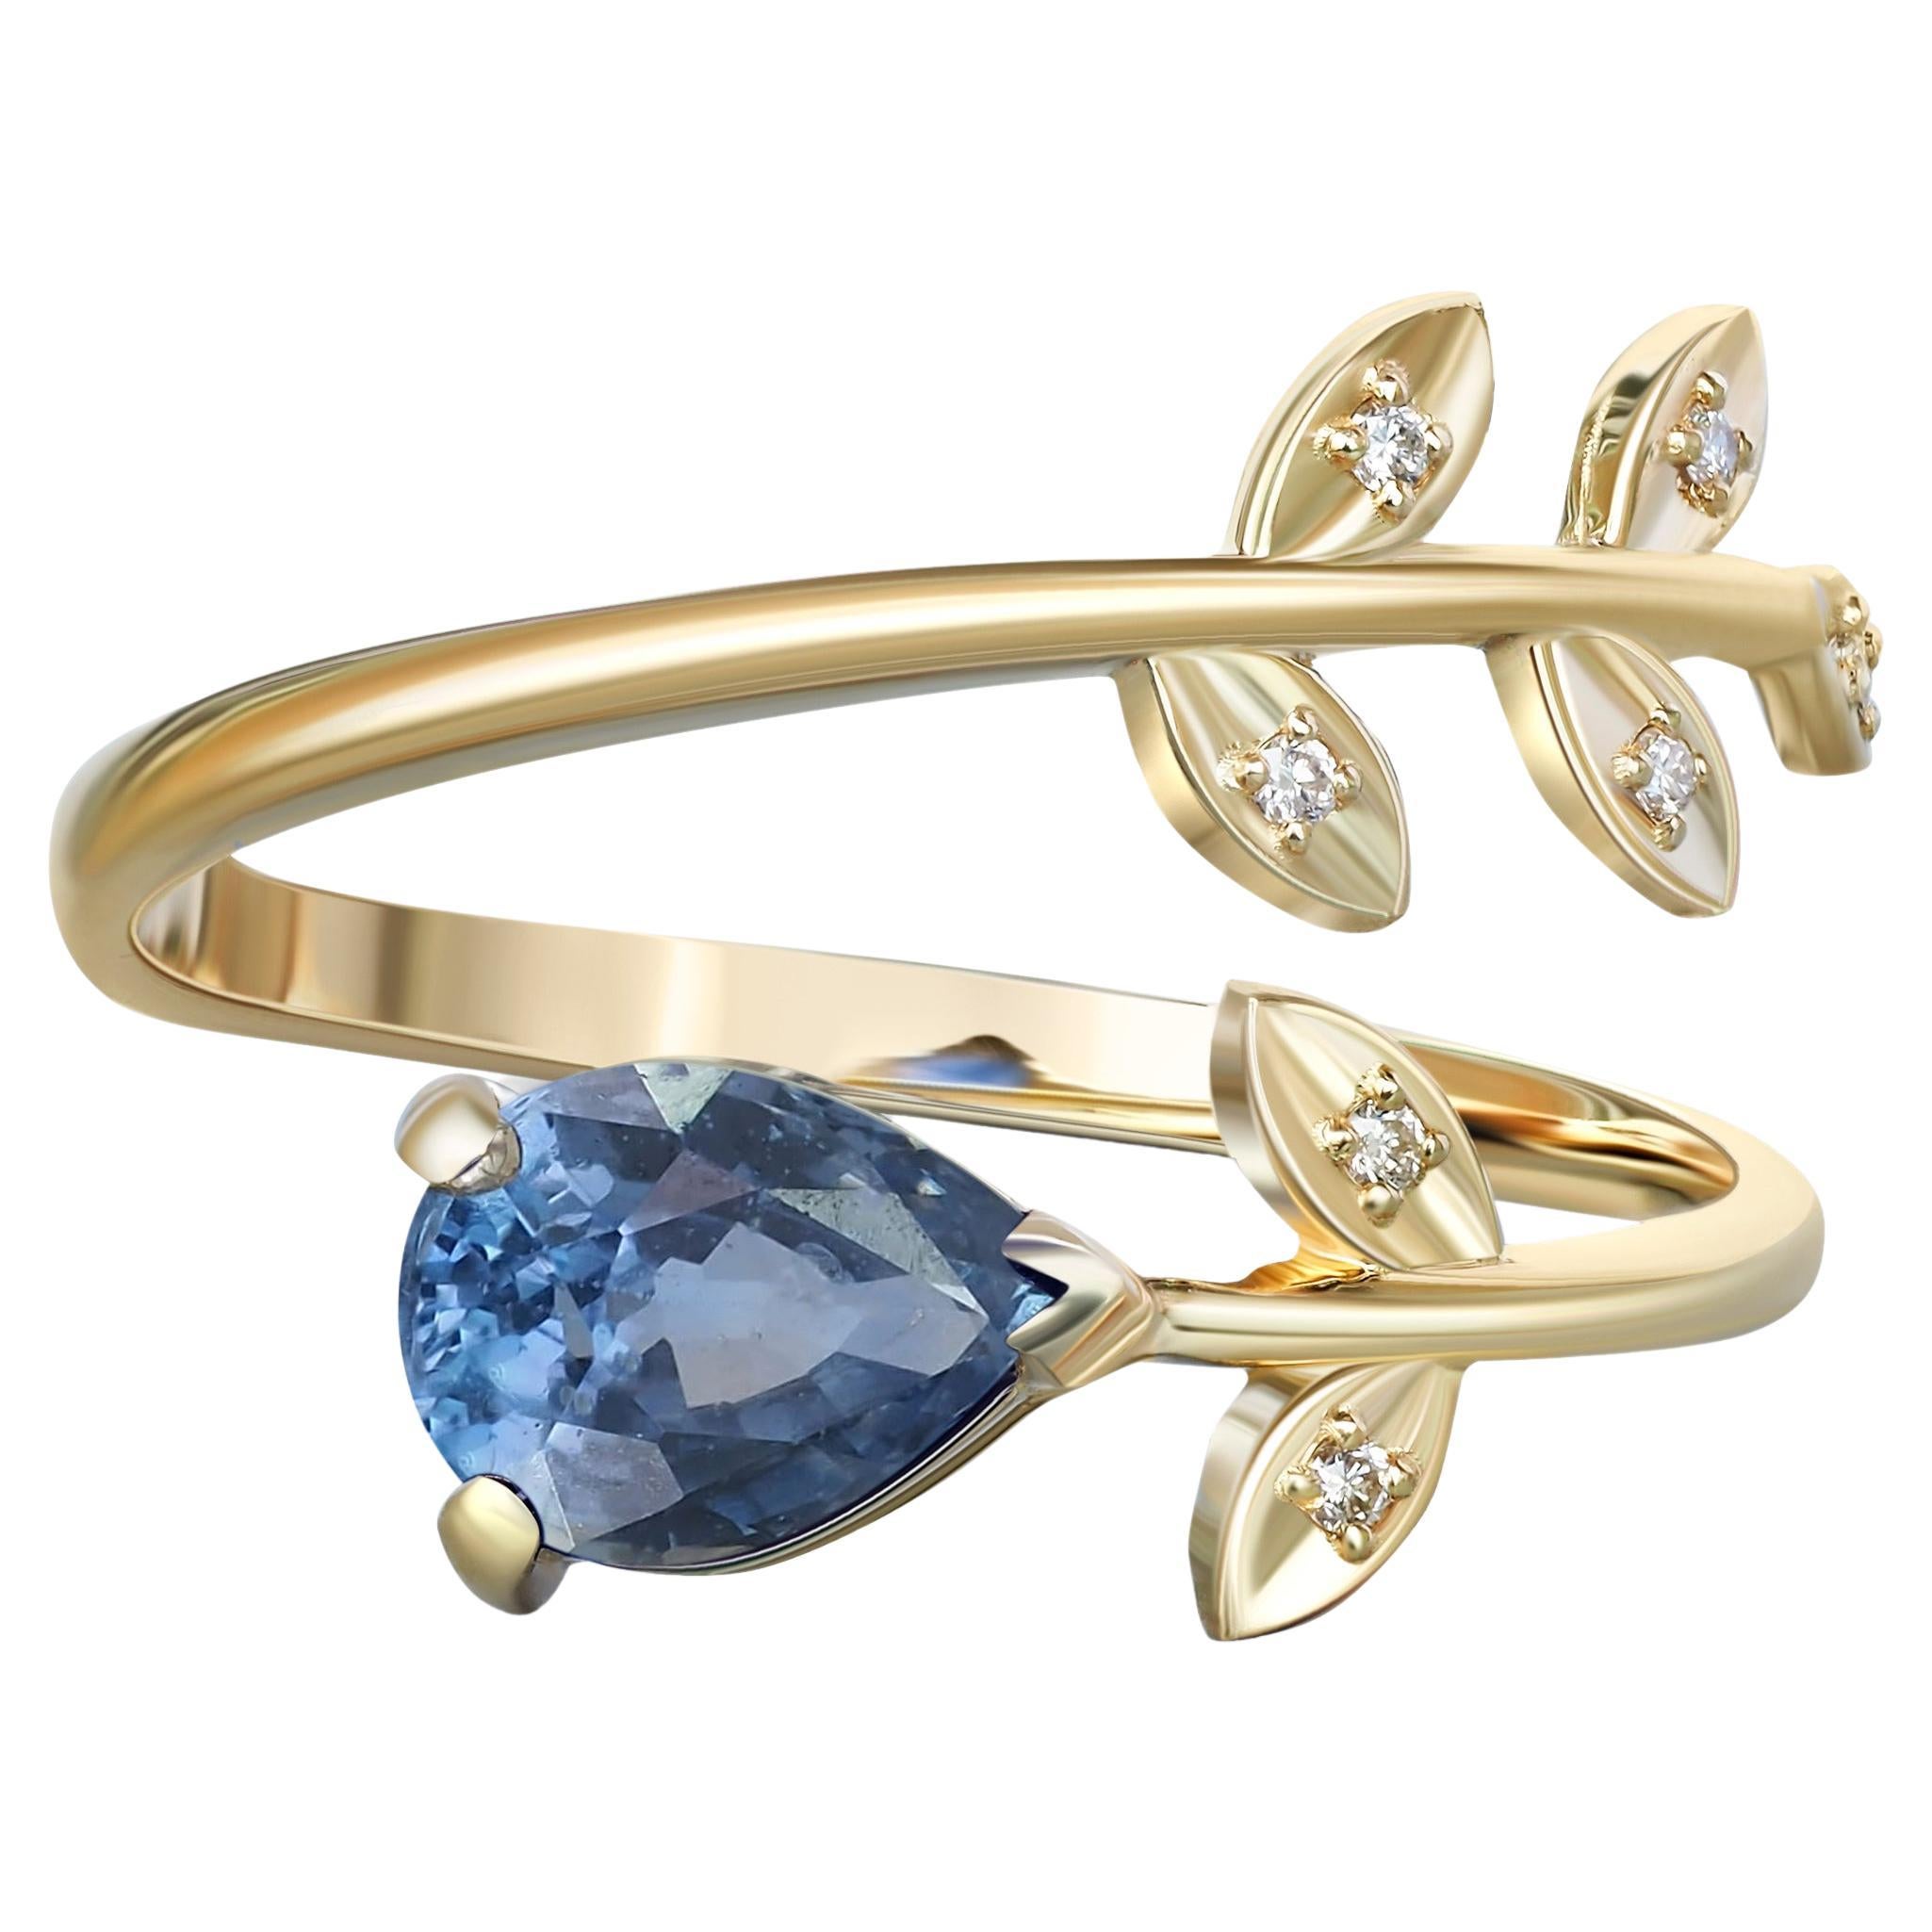 Pear Sapphire 14k Gold Ring, Blue Sapphire Gold Ring